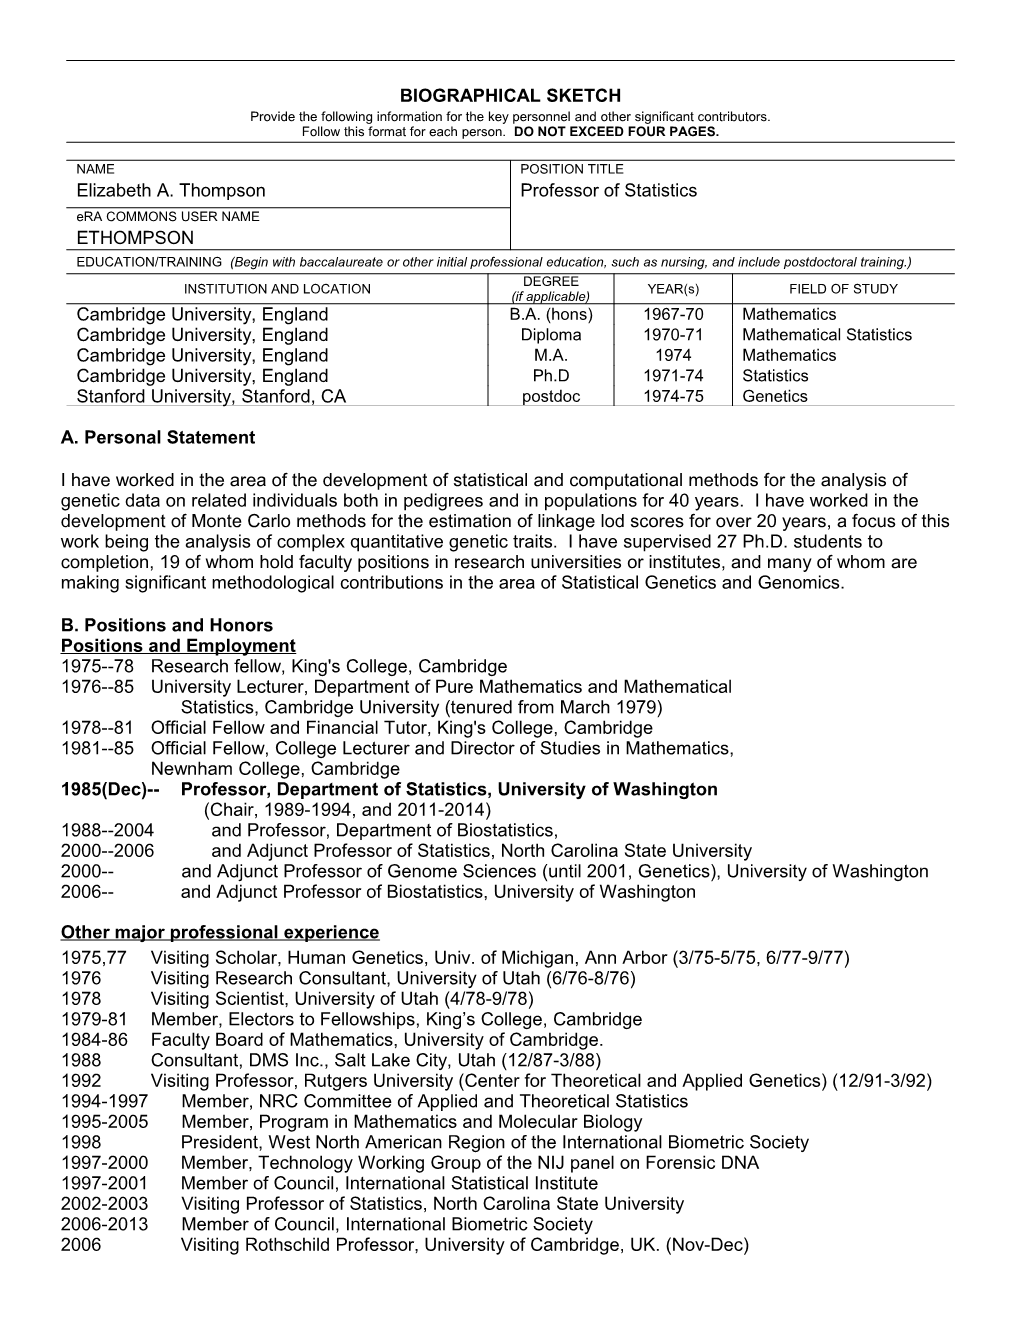 PHS 398 (Rev. 9/04), Biographical Sketch Format Page s21